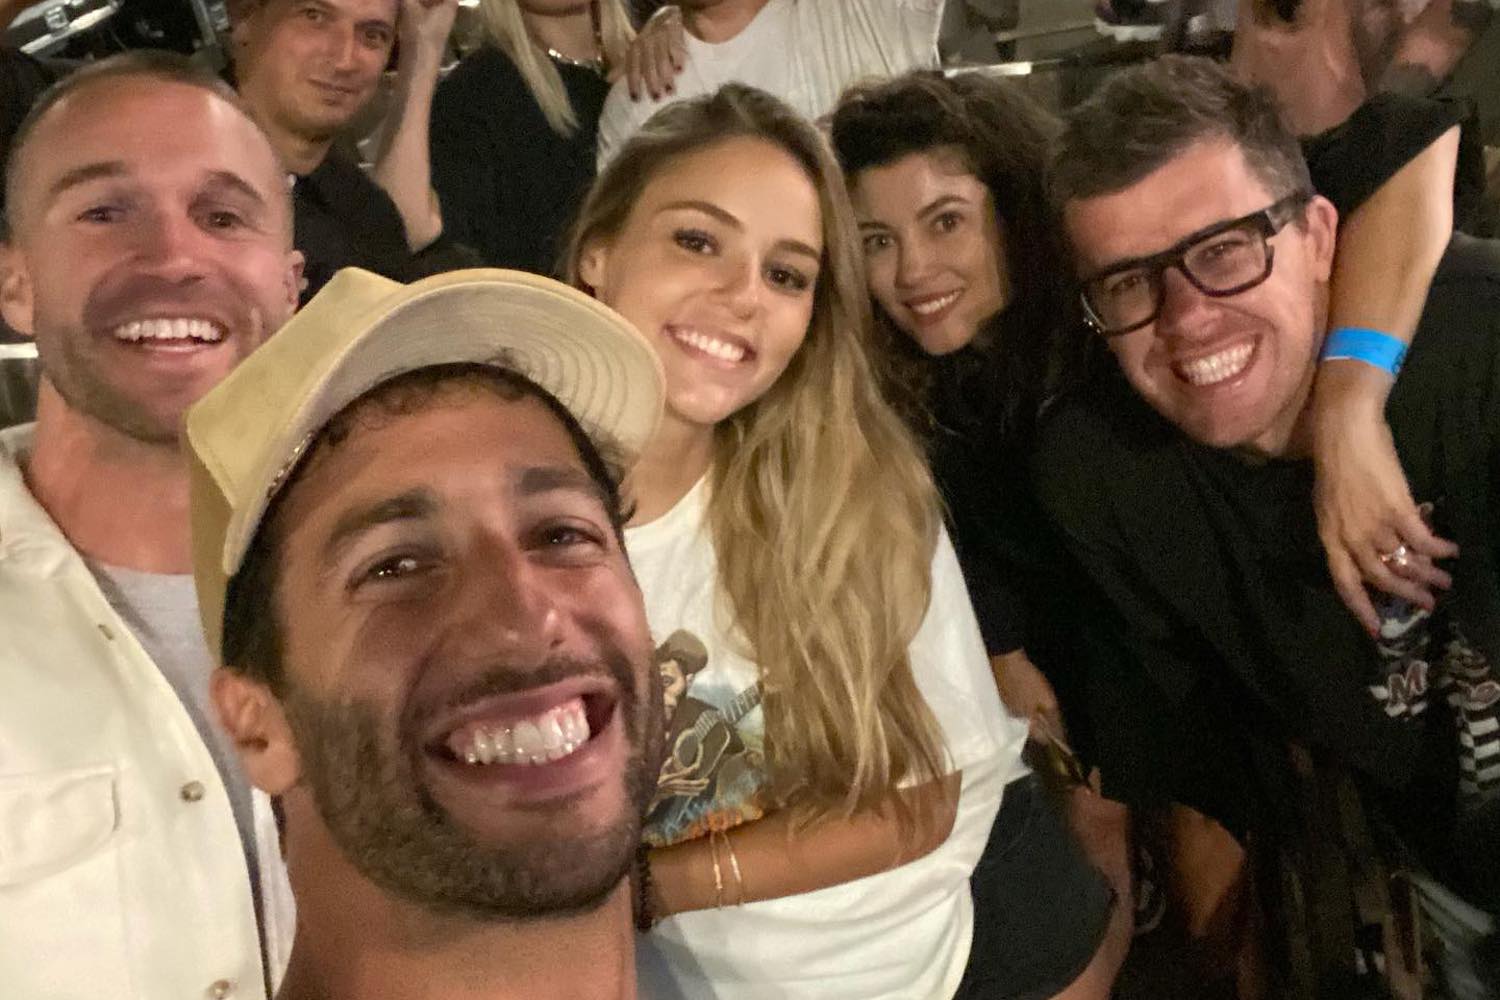 Daniel Ricciardo Might Be Losing His F1 Seat, But He’s Gained A Girlfriend